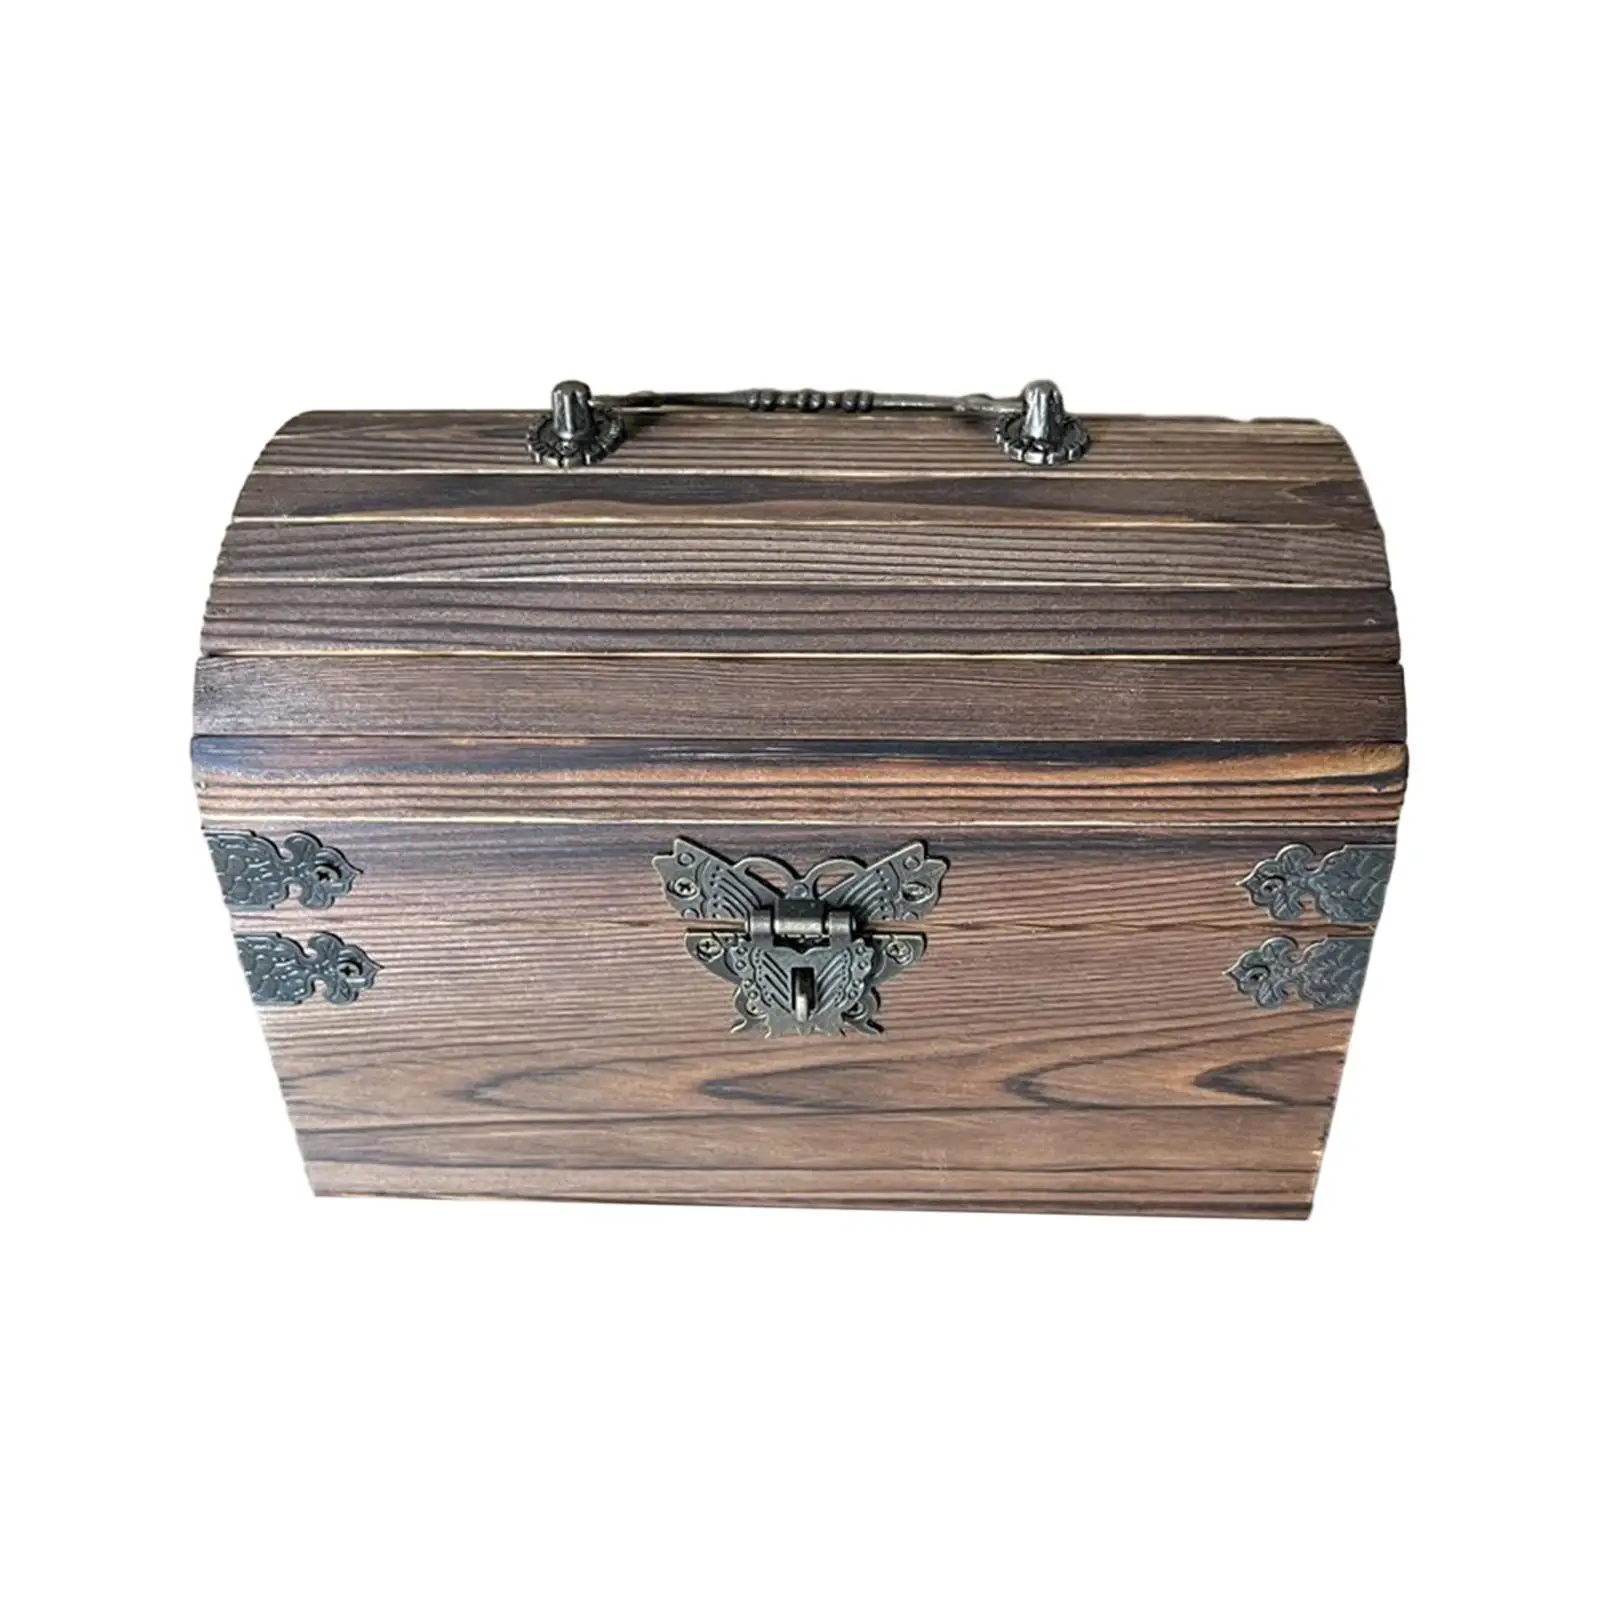 Piggy Bank with Lock Multifunction Home Decoration Portable Decorative Wooden Box Money Box for Boys Adults Birthday Gifts